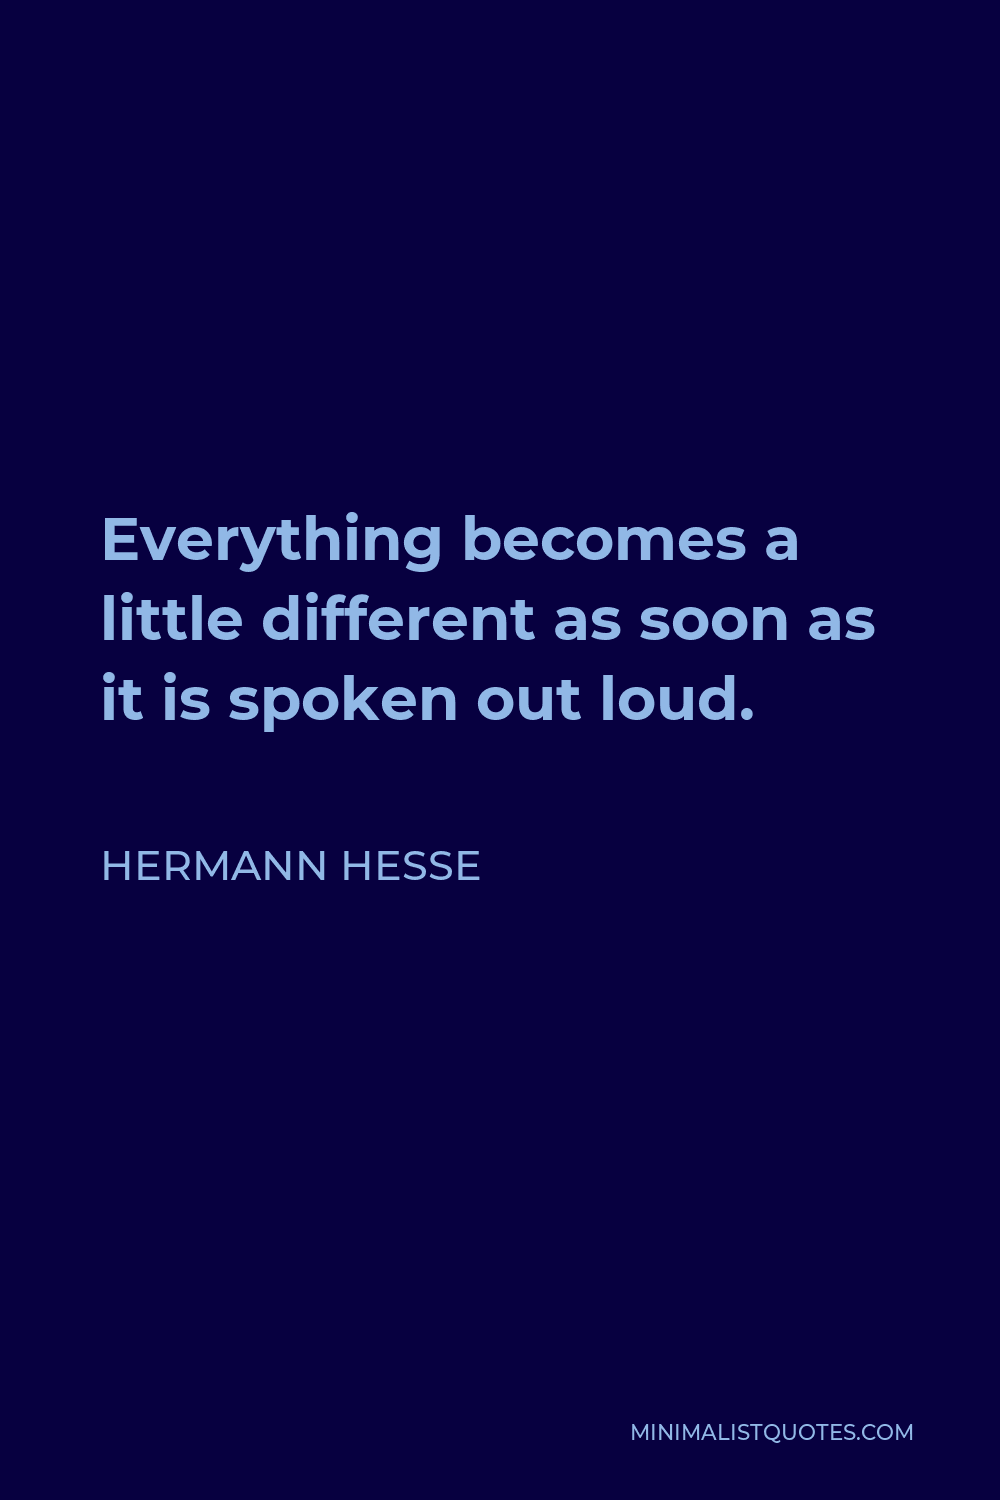 Hermann Hesse Quote - Everything becomes a little different as soon as it is spoken out loud.